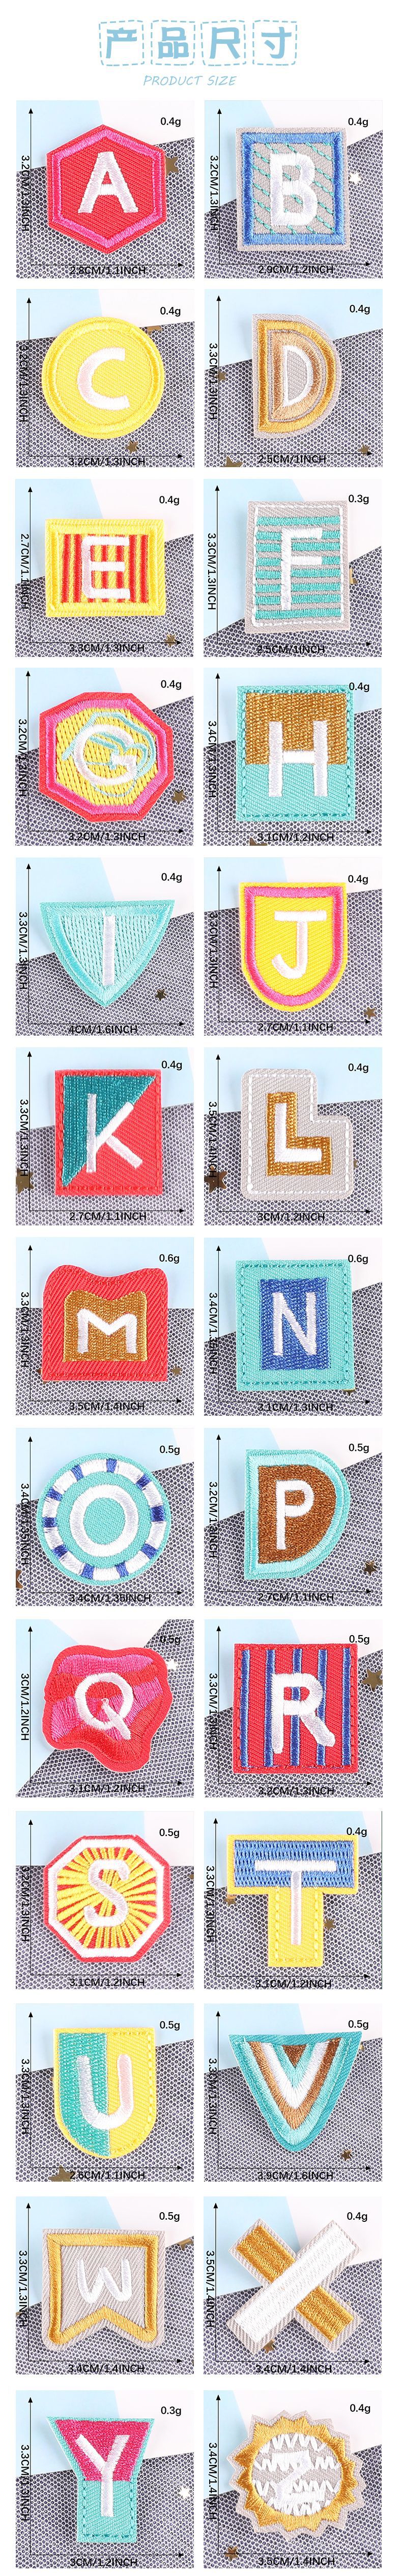 Embroidered alphabets 04